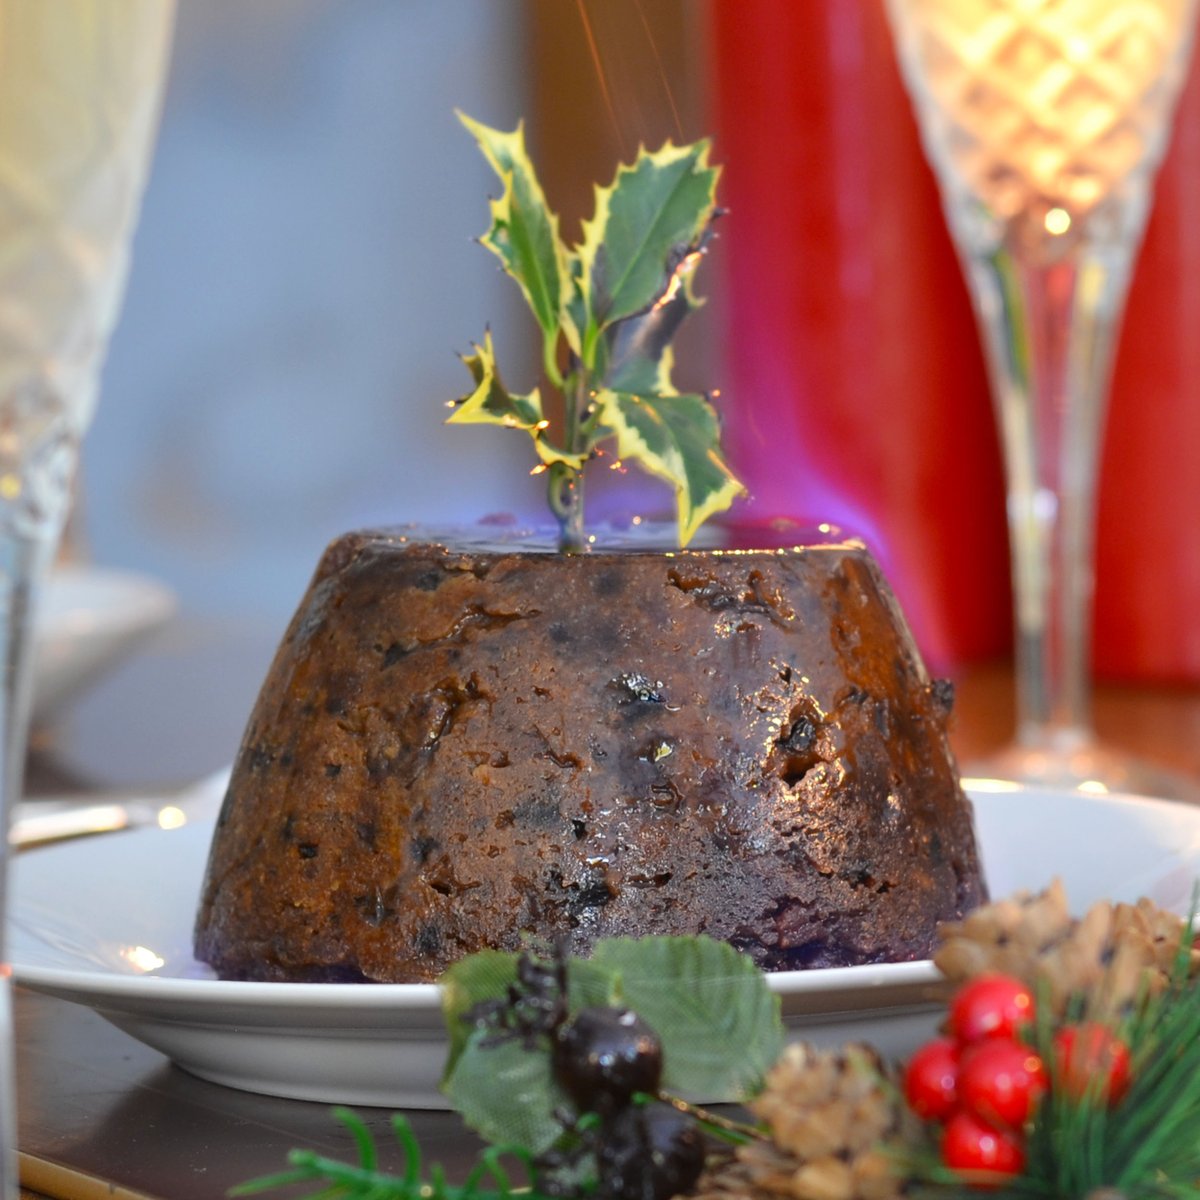 Stir Up Sunday is this weekend! 🥄 If you've forgotten to make your own this year, we highly recommend the brandy Christmas pudding from Cole's - you can find it along with other festive treats in our Christmas hampers 🎁 #StirUpSunday #ChristmasPudding #ChristmasHampers